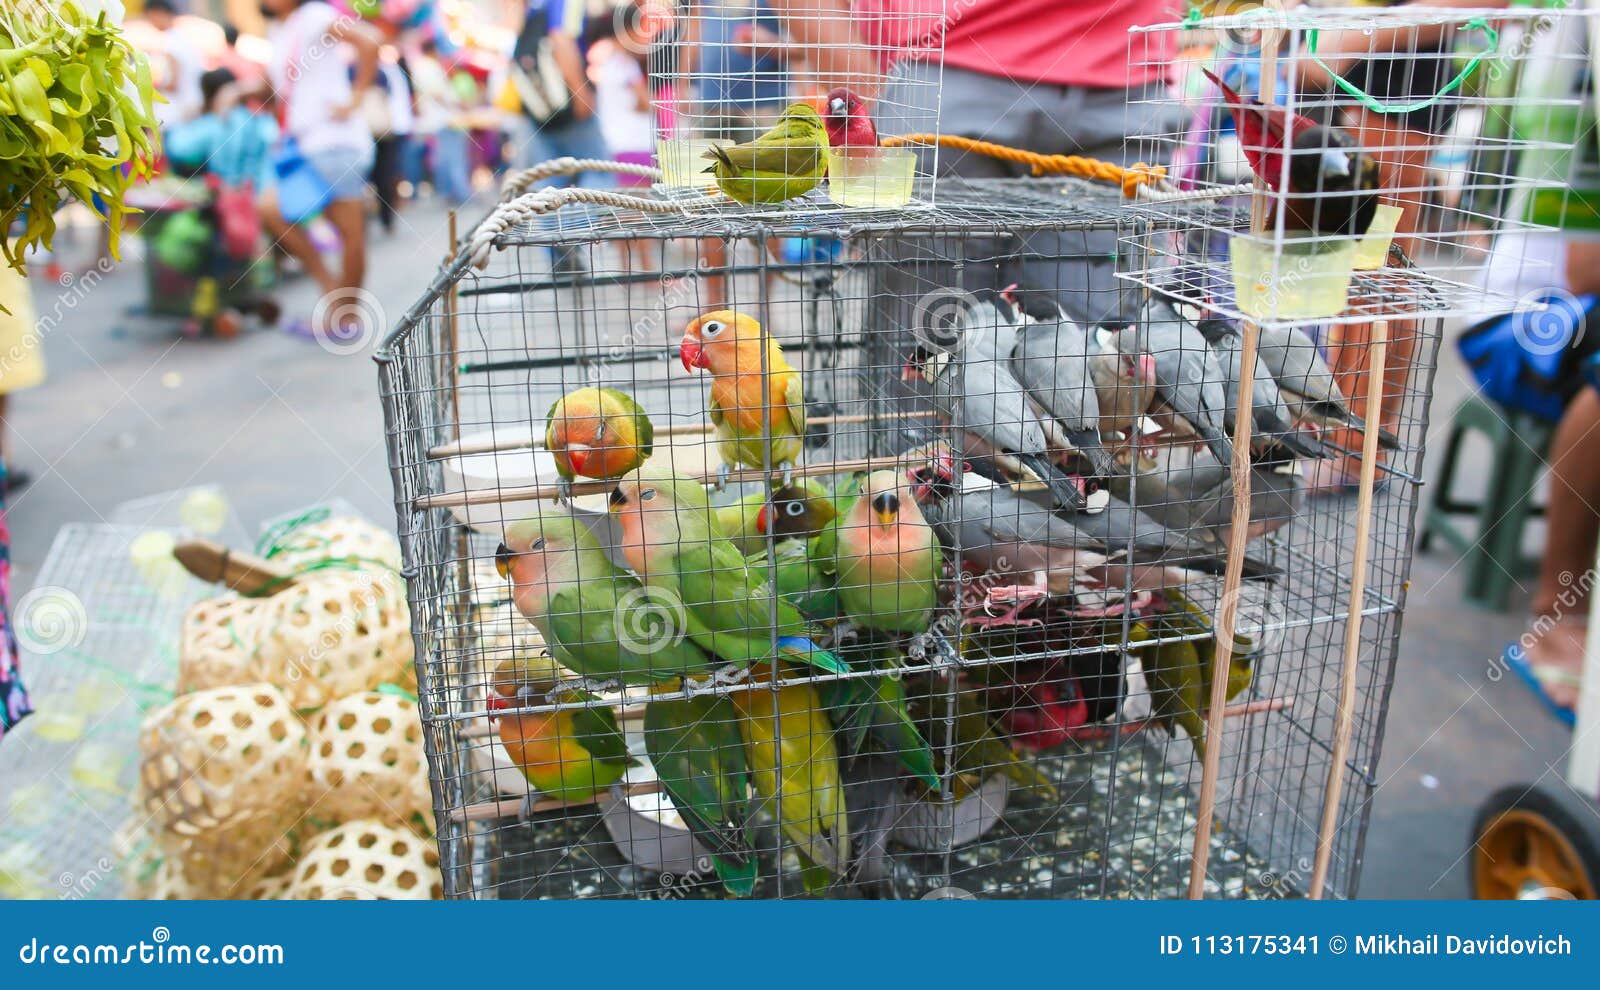 fact Cheetah guitar Multicolored Parrots in a Cage. Sale of Parrots in the Local Philippine  Market. Stock Image - Image of adventure, jakarta: 113175341